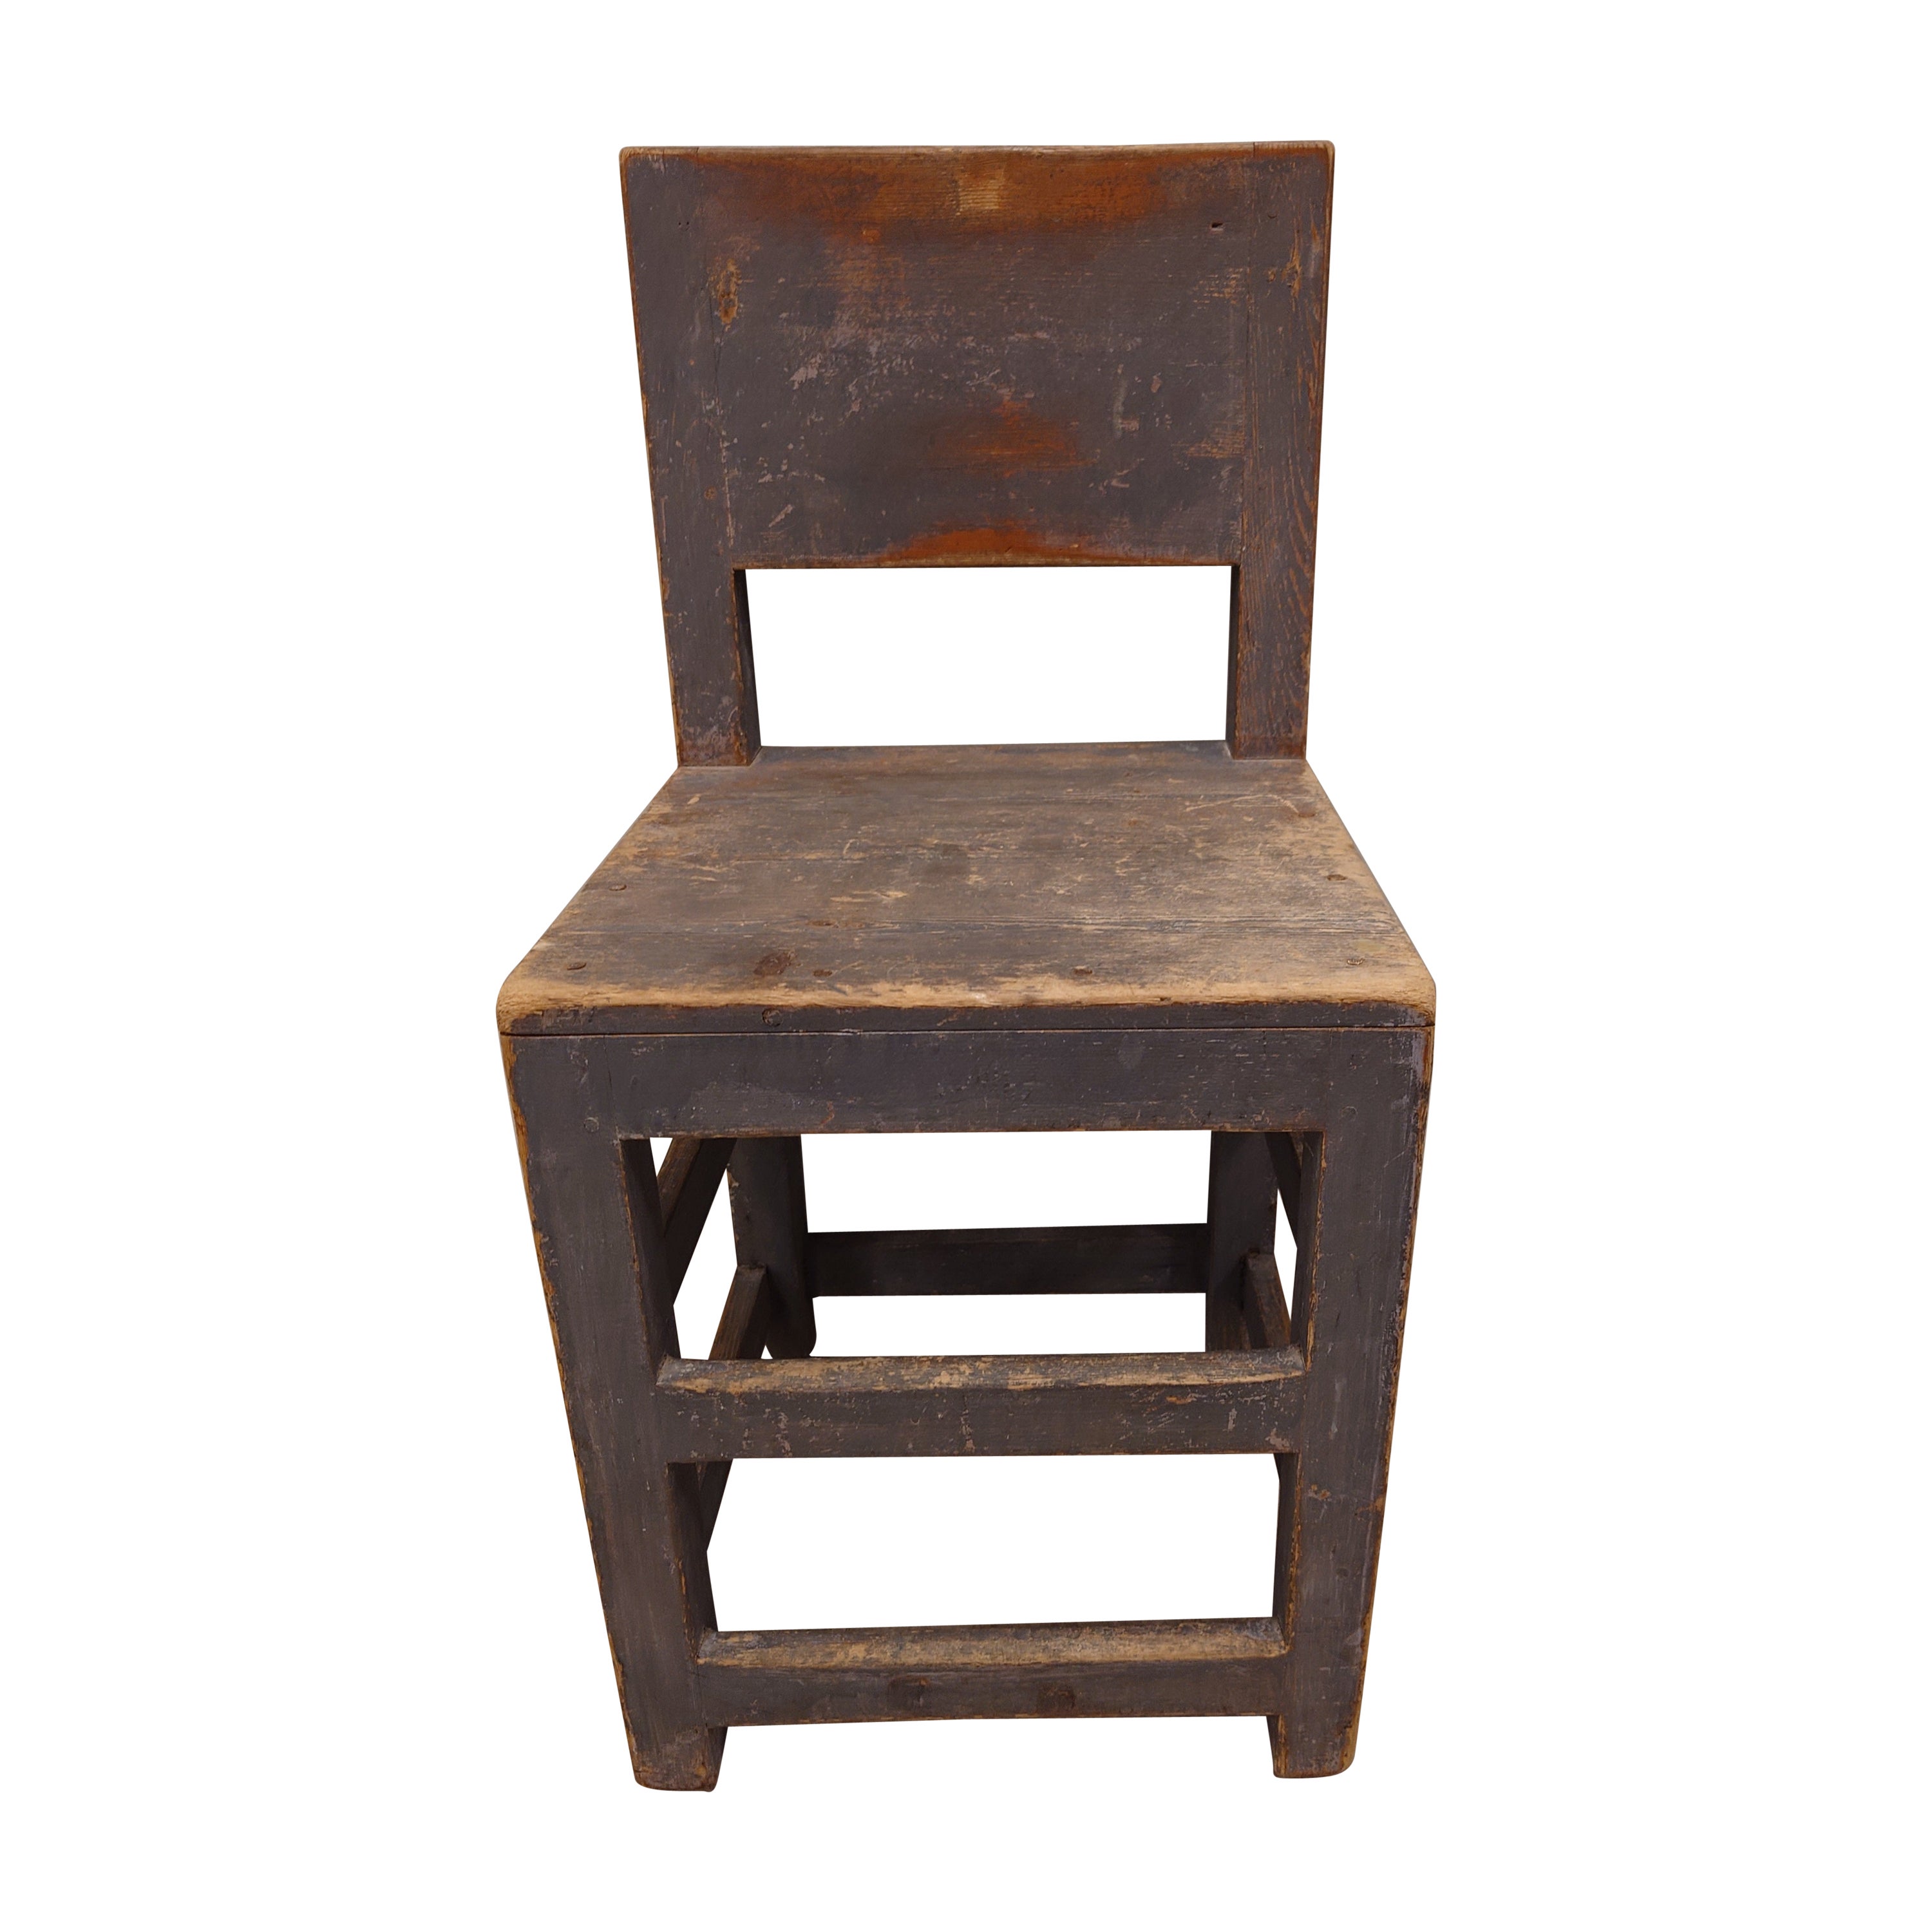 19th Century Swedish Antique Rustic Baroque Style Chair with Original Paint For Sale